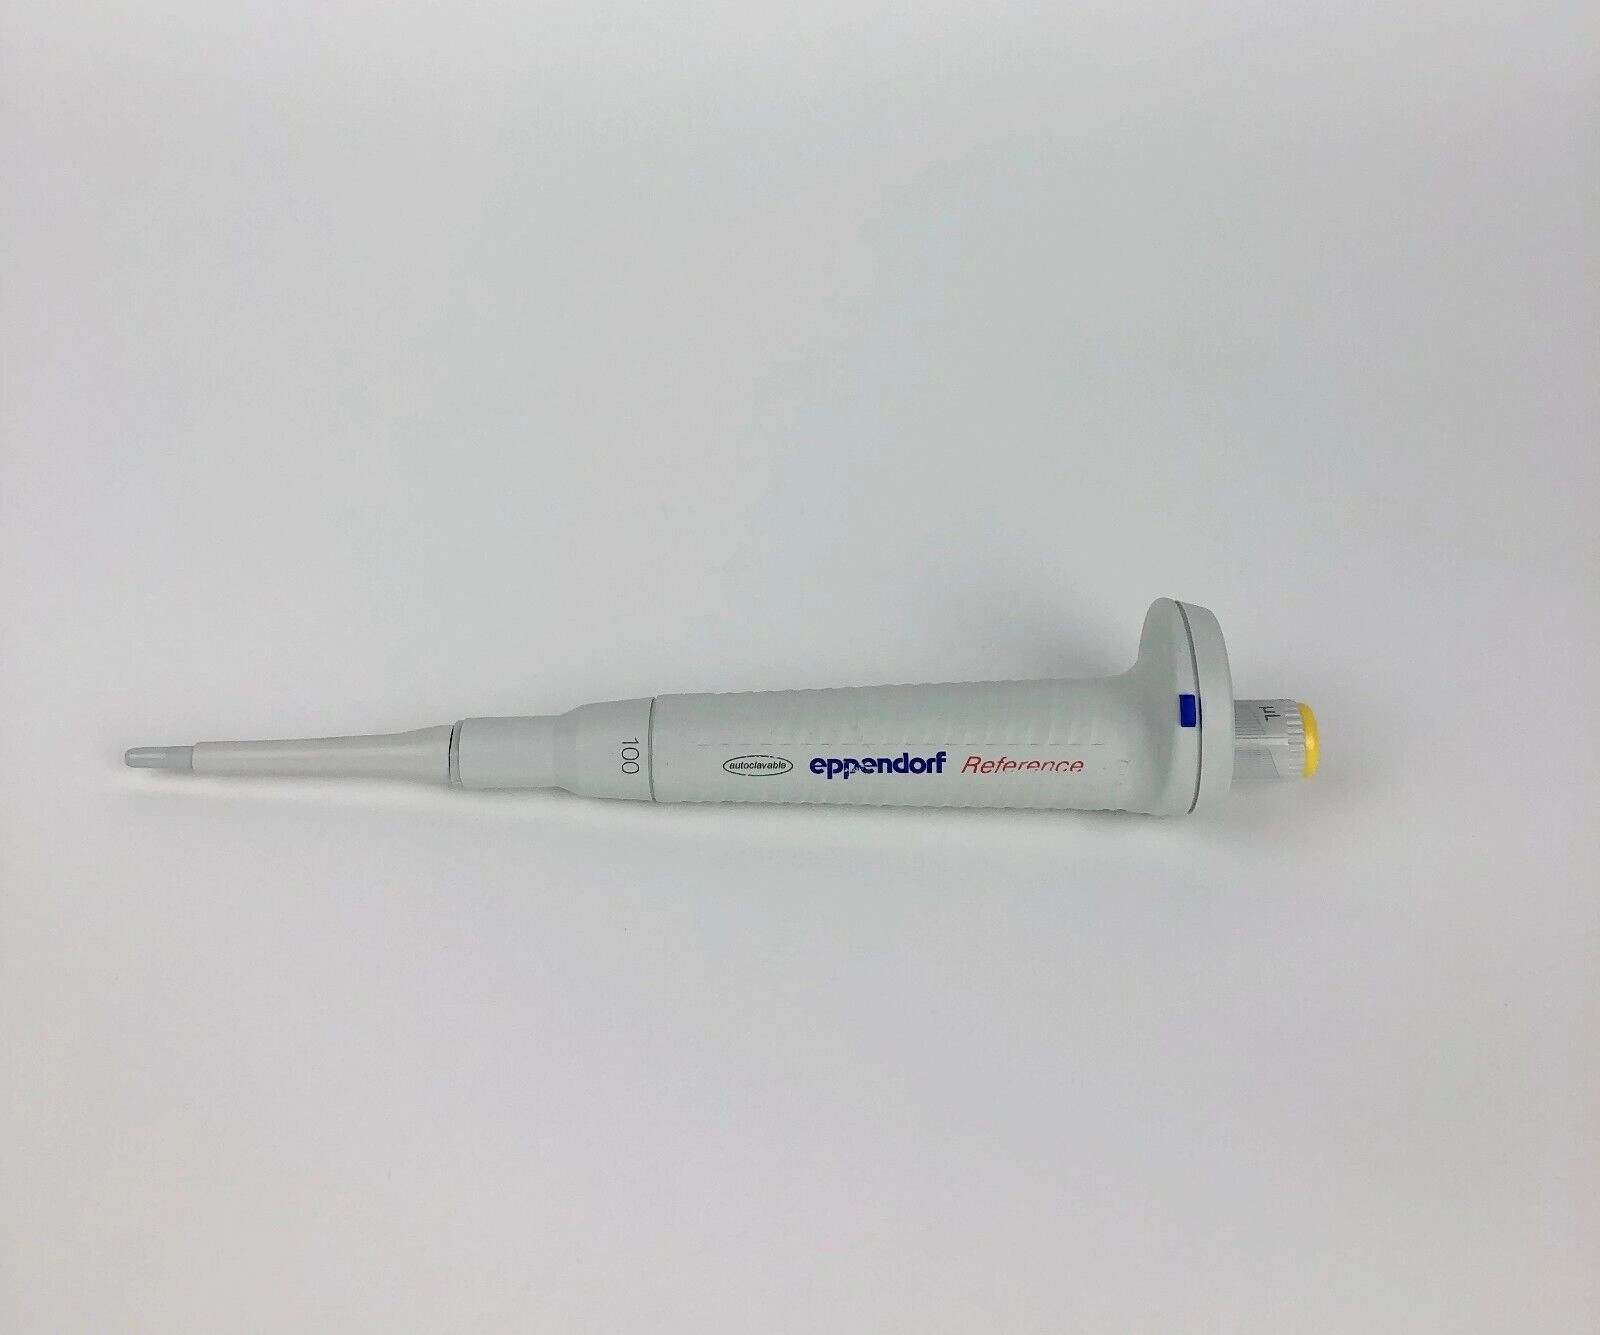 Eppendorf Reference Pipette 100